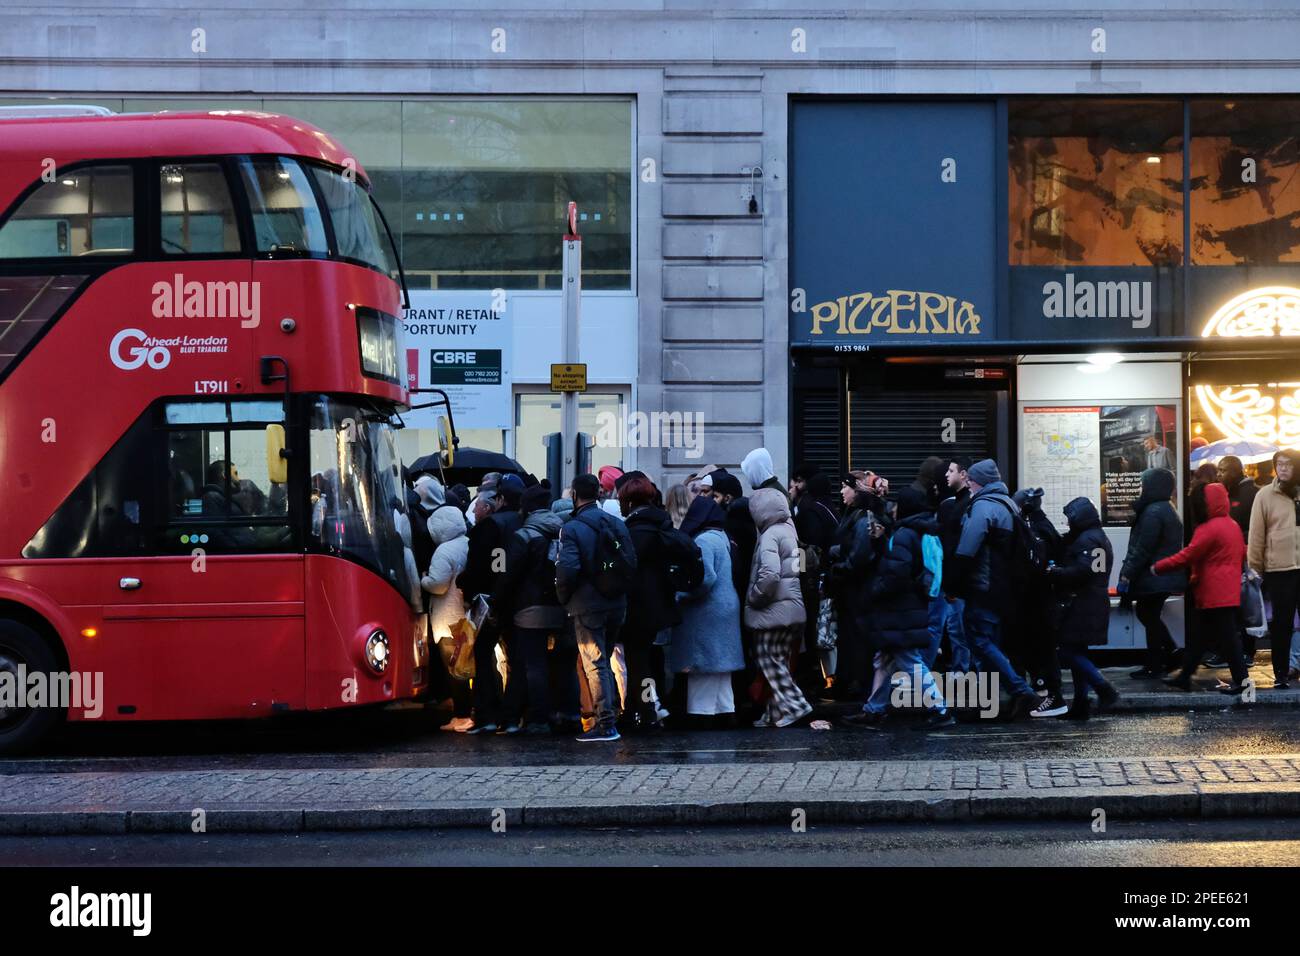 London, UK. 15th March, 2023. Passengers queue for a bus in the Strand during rush hour. A 24-hour strike by members of the Aslef and RMT Unions, closed-down Transport for London's (TfL) underground services, causing a knock-on effect by an increase in road traffic congestion, with also overcrowding on buses and overground trains.   Credit: Eleventh Hour Photography/Alamy Live News Stock Photo